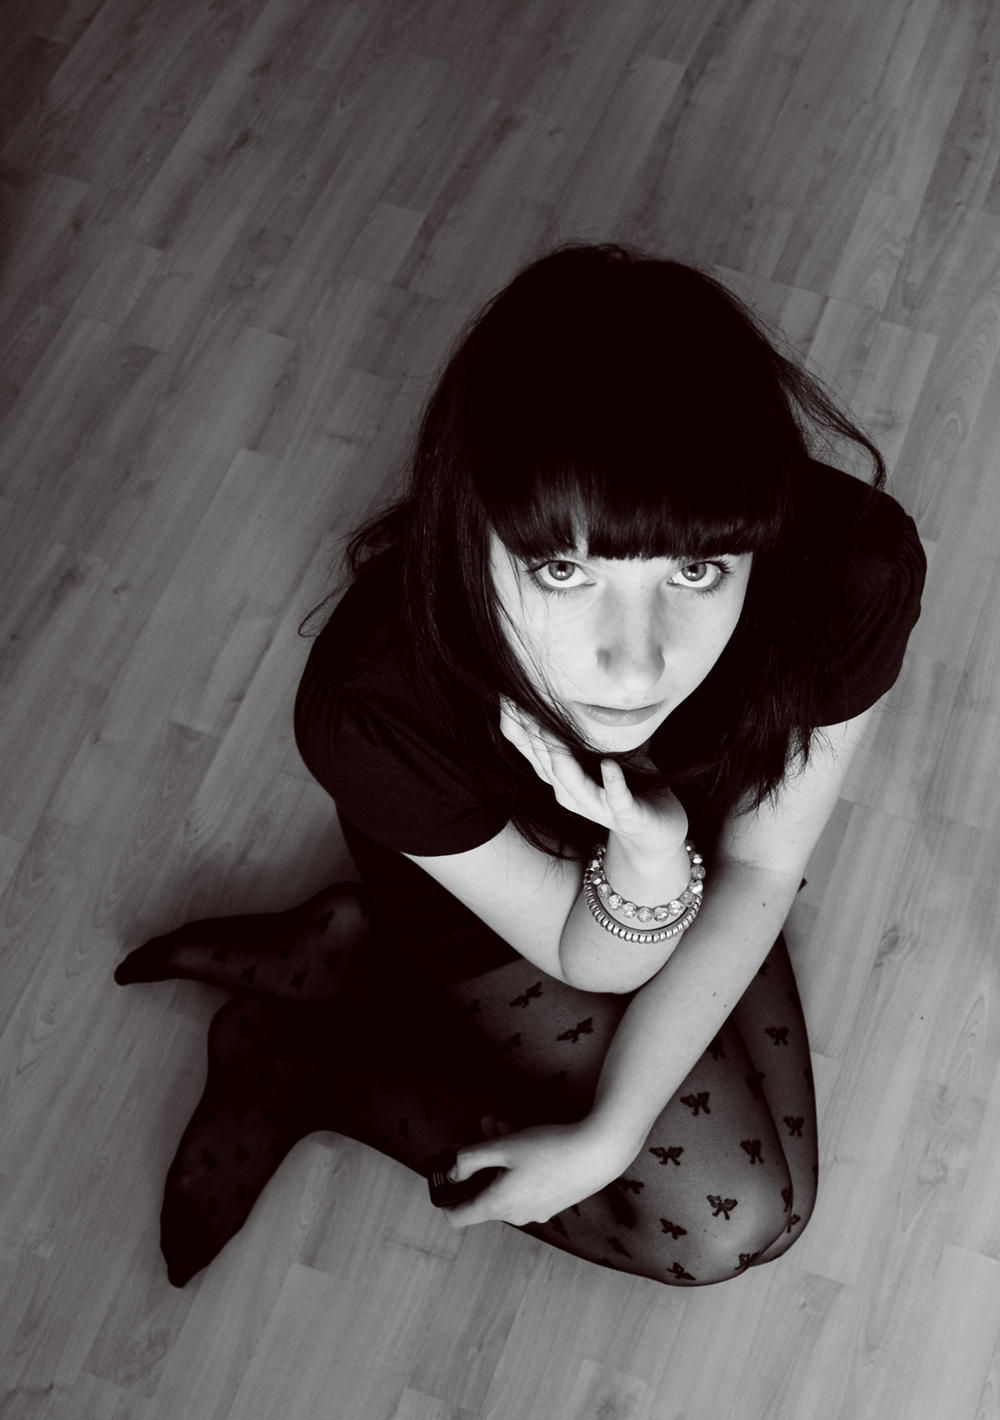 Girl in black dress on wood flooring looking up at the camera.